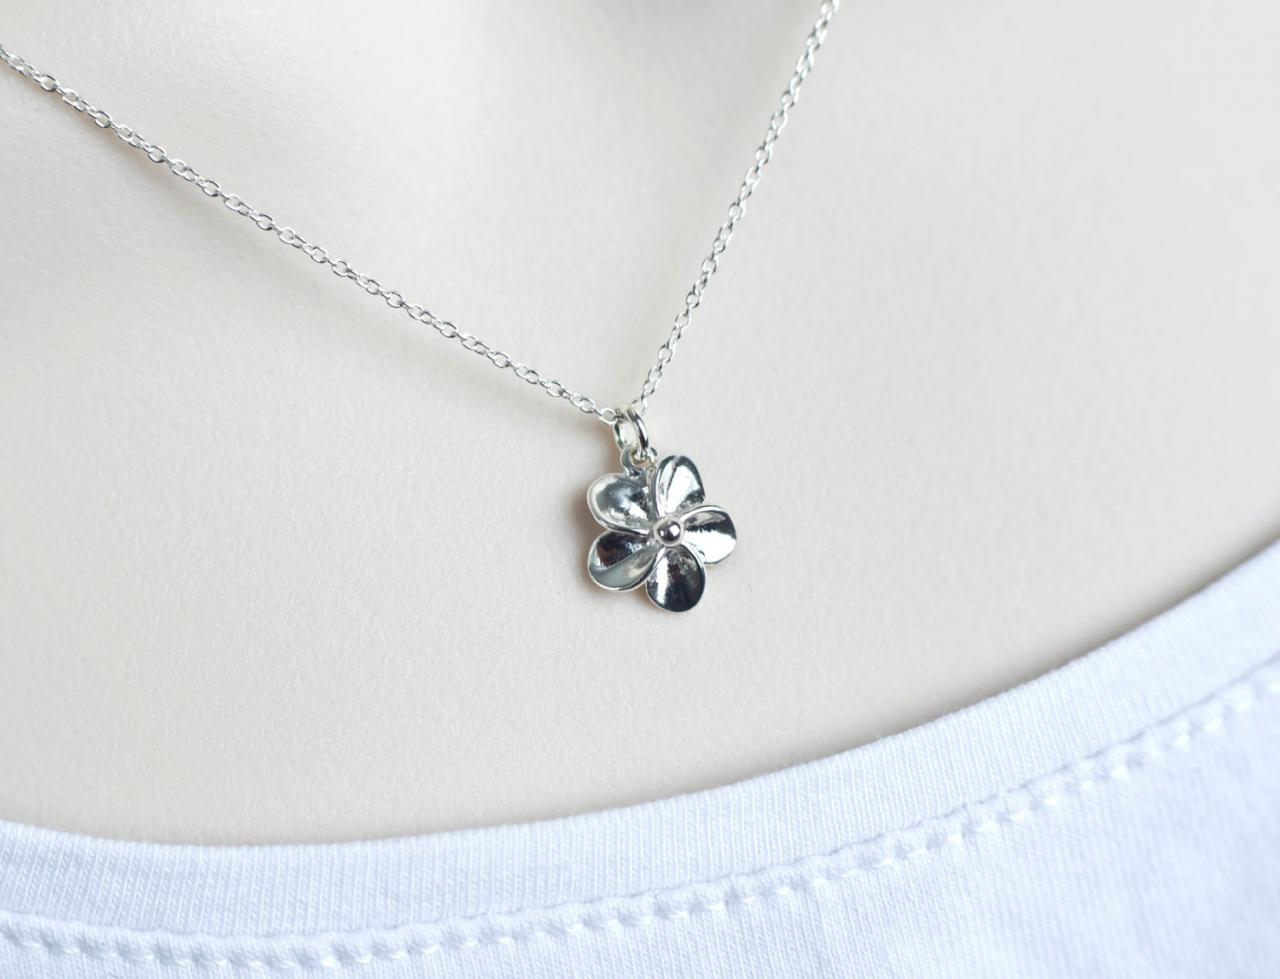 Tiny Sterling Silver Flower Necklace, Small Plumeria Necklace, Sterling Silver Flower Necklace, Floral Botanical Nature Modern Everyday Gift